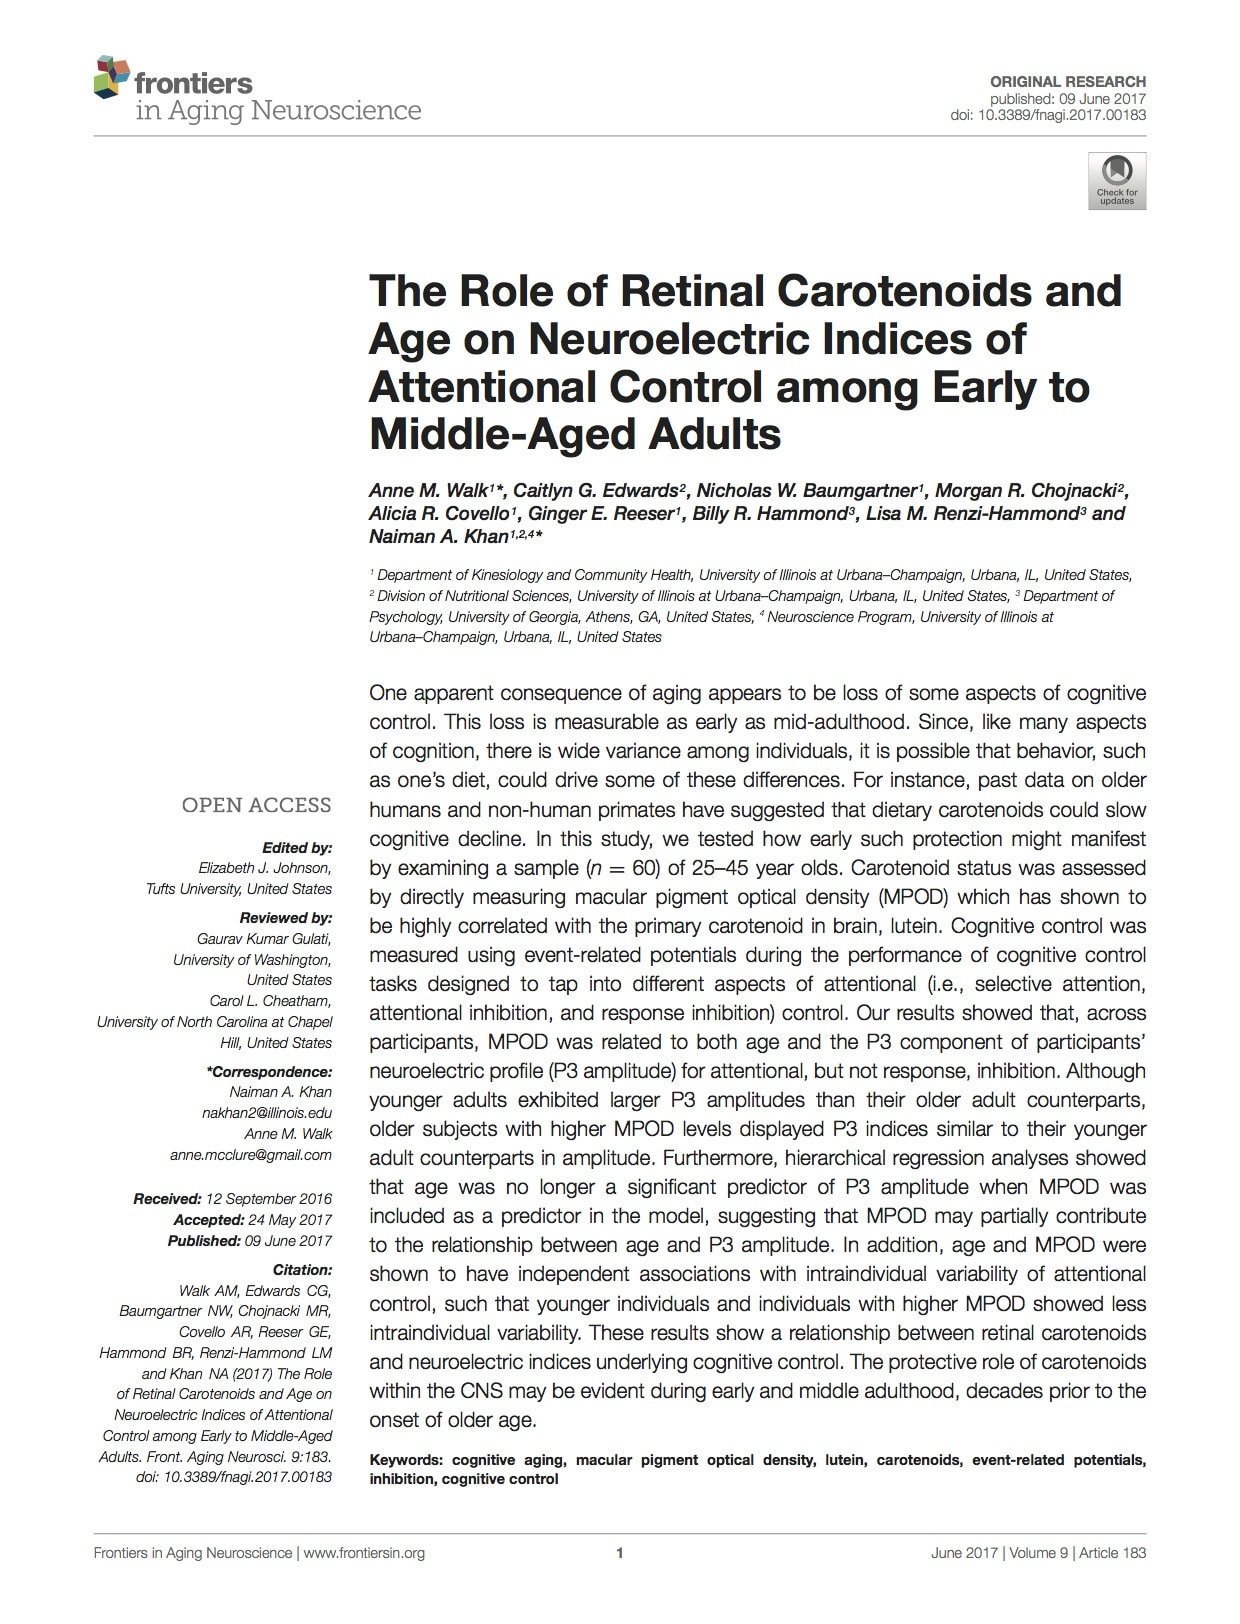 The Role of Retinal Carotenoids and Age on Neuroelectric Indices of Attentional Control among Early to Middle-Aged Adults (2017)